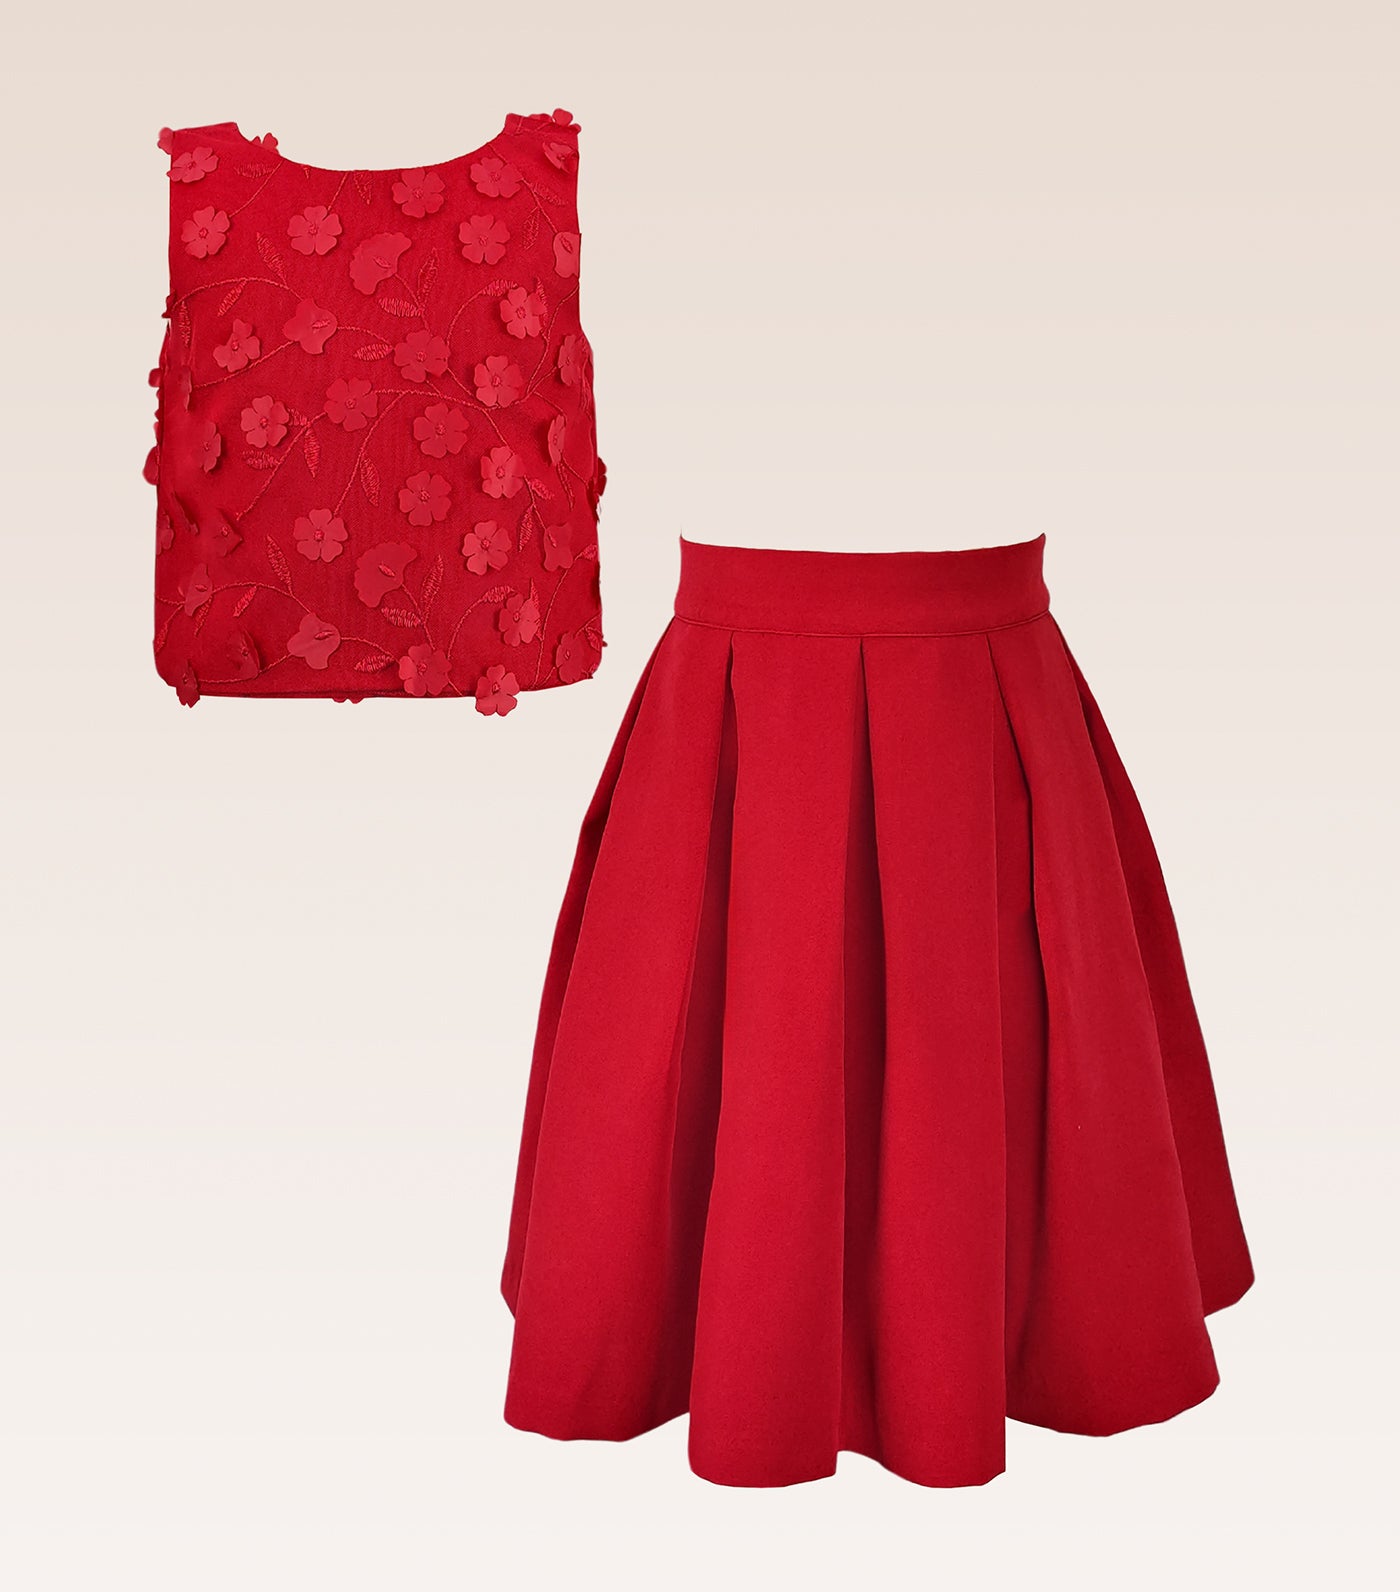 Gwen Girls Red Party Dress Shell Mesh Floral Top and Pleated Skirt